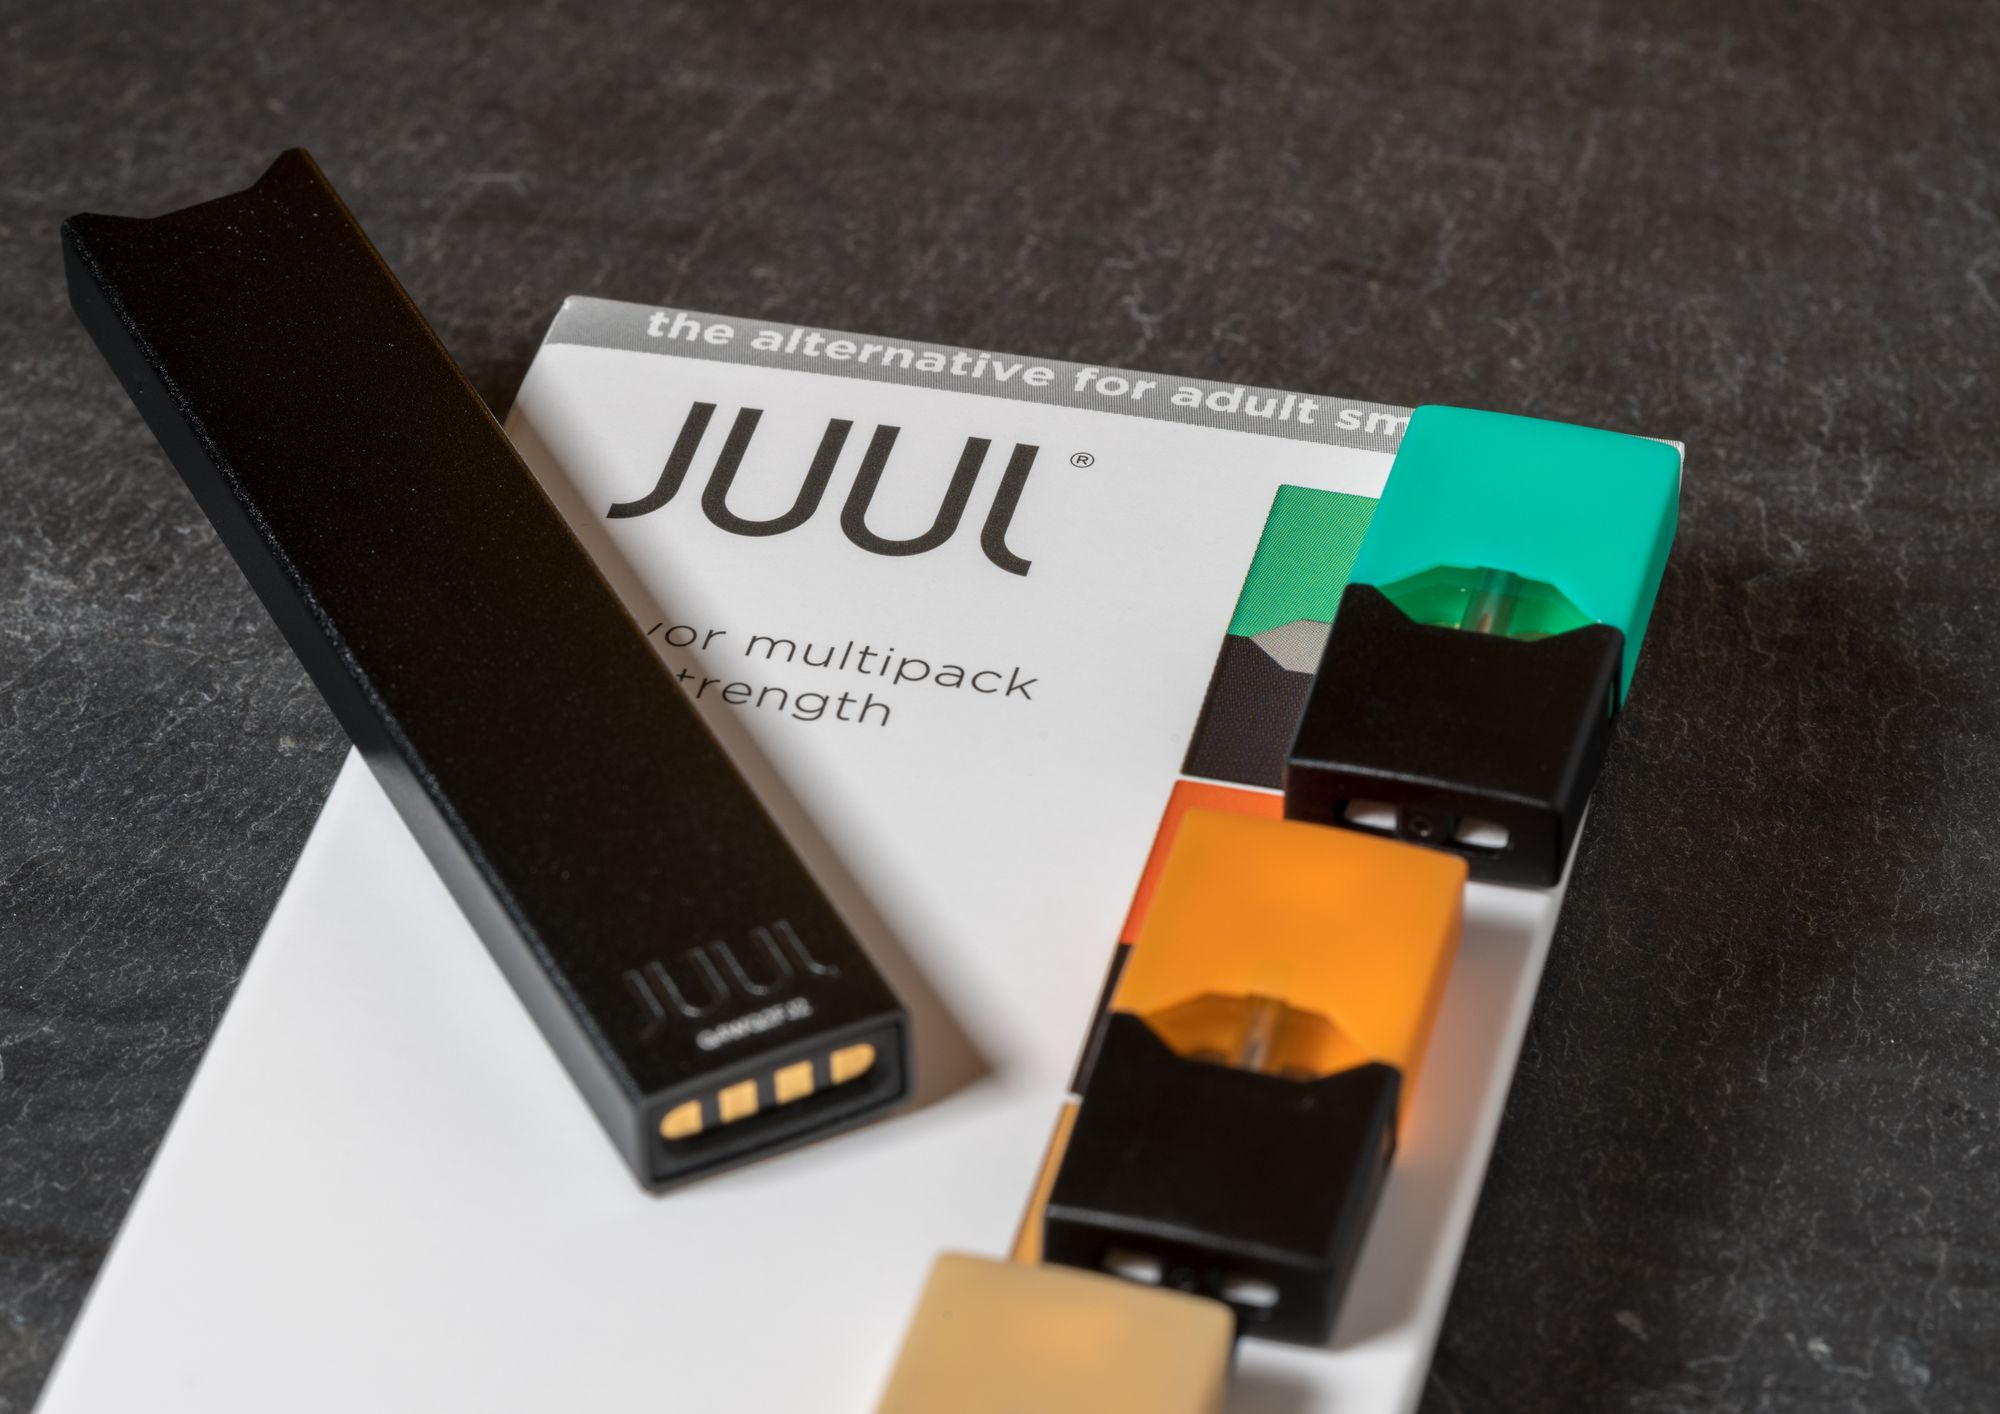 Only a Few Days Remain to File a Claim in the $300 Million Juul Class Action Settlement - No Proof Required!